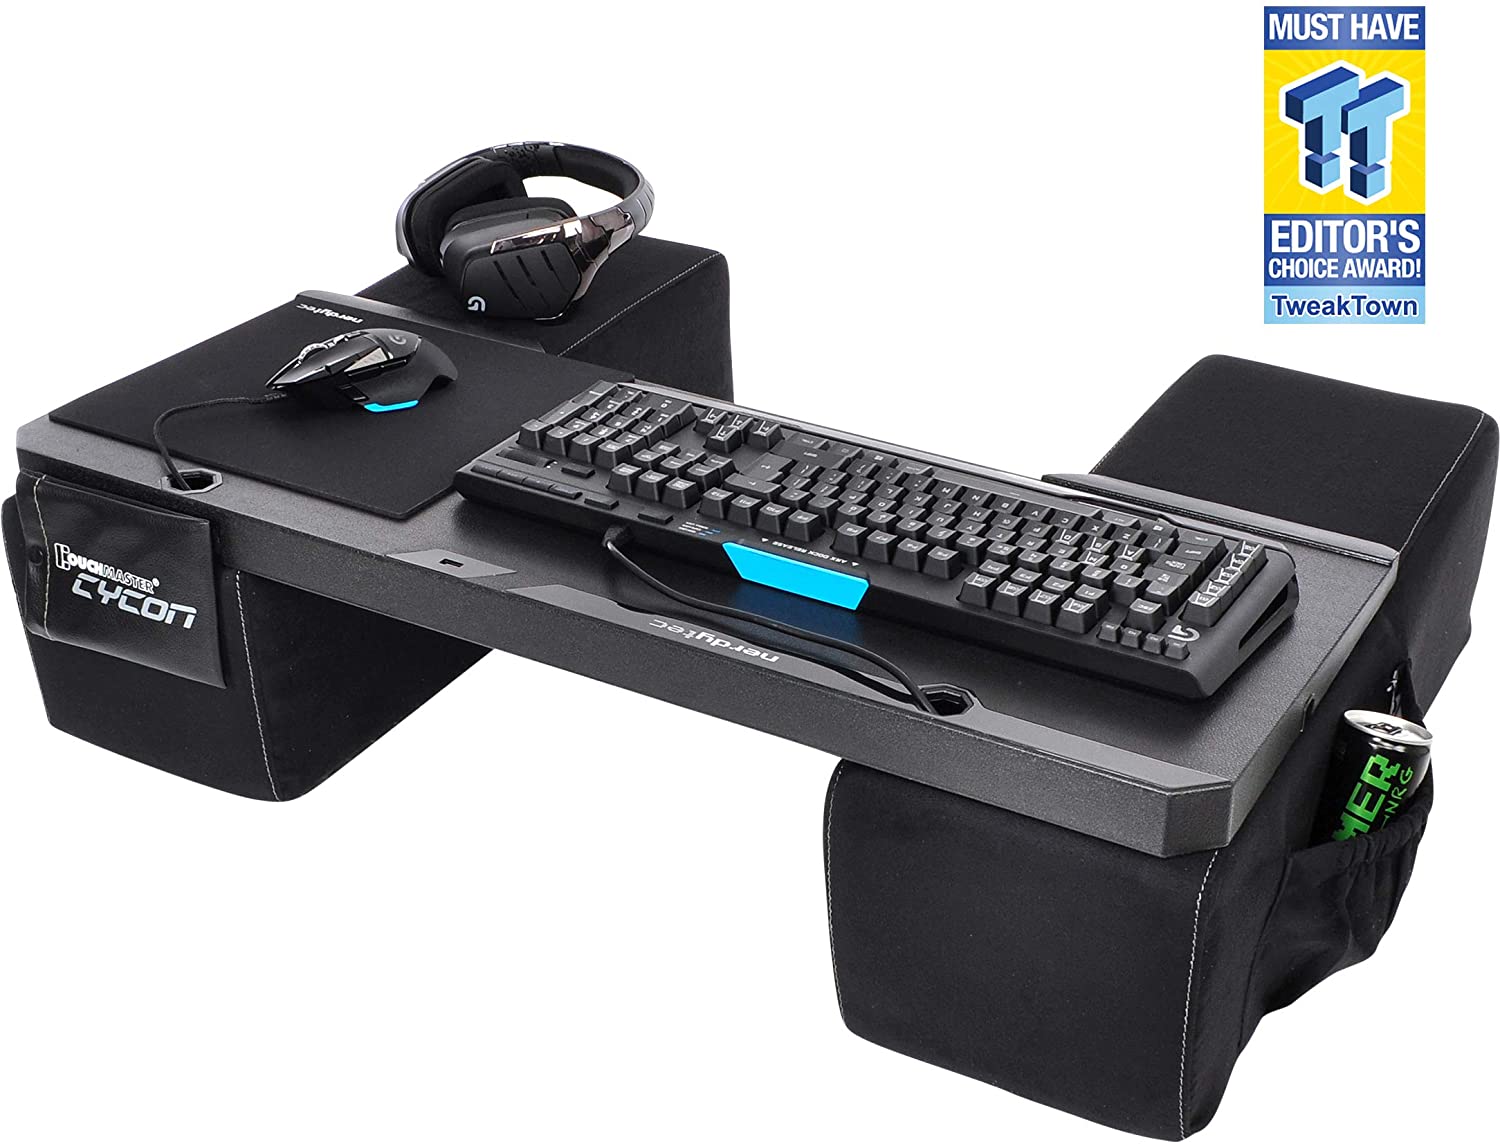 Couchmaster CYCON The Couch Gaming Desk